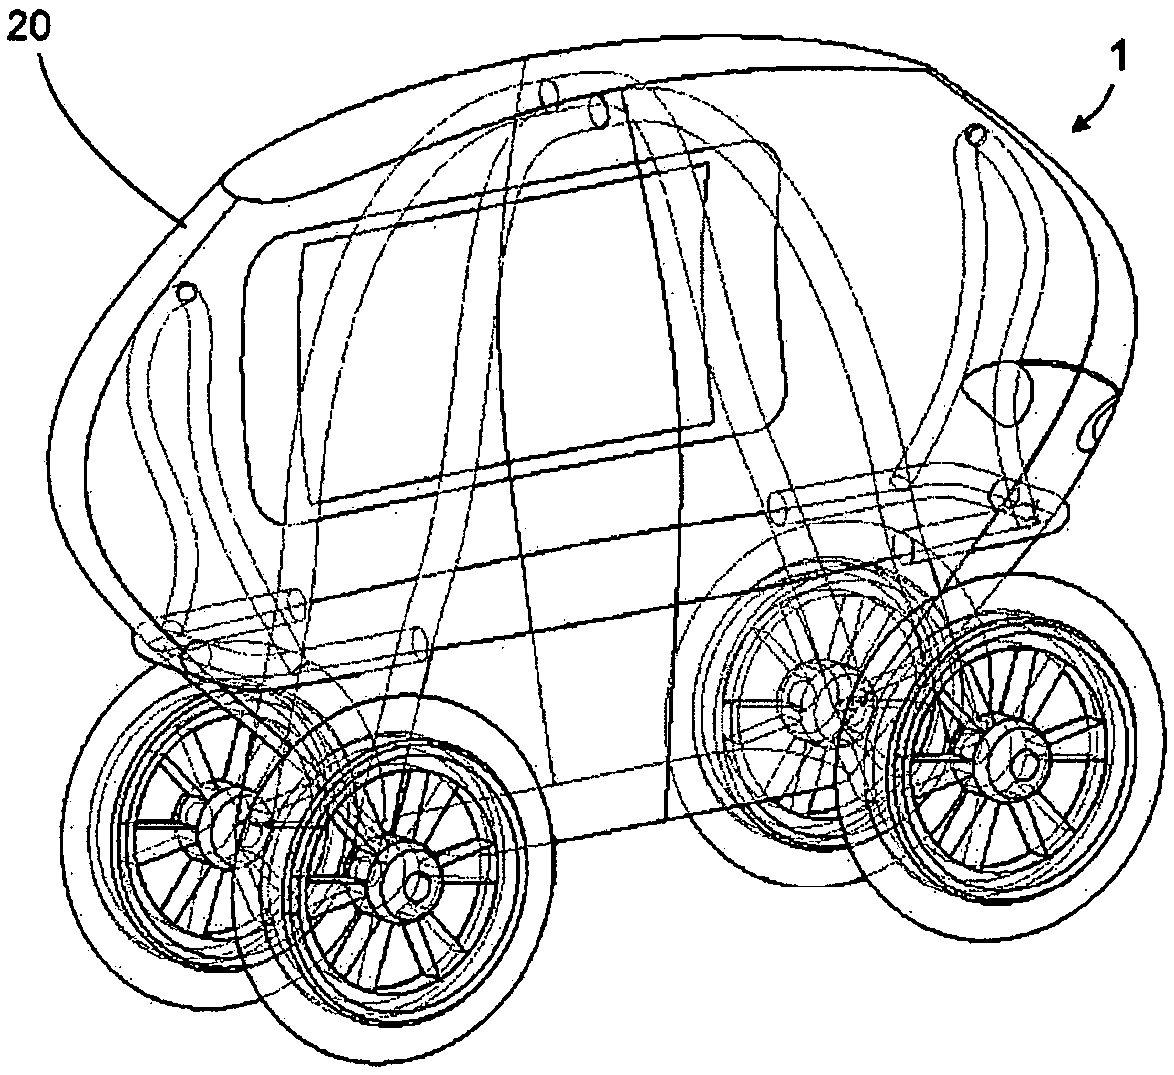 Traffic system, self-propelled vehicle, and traffic system control process